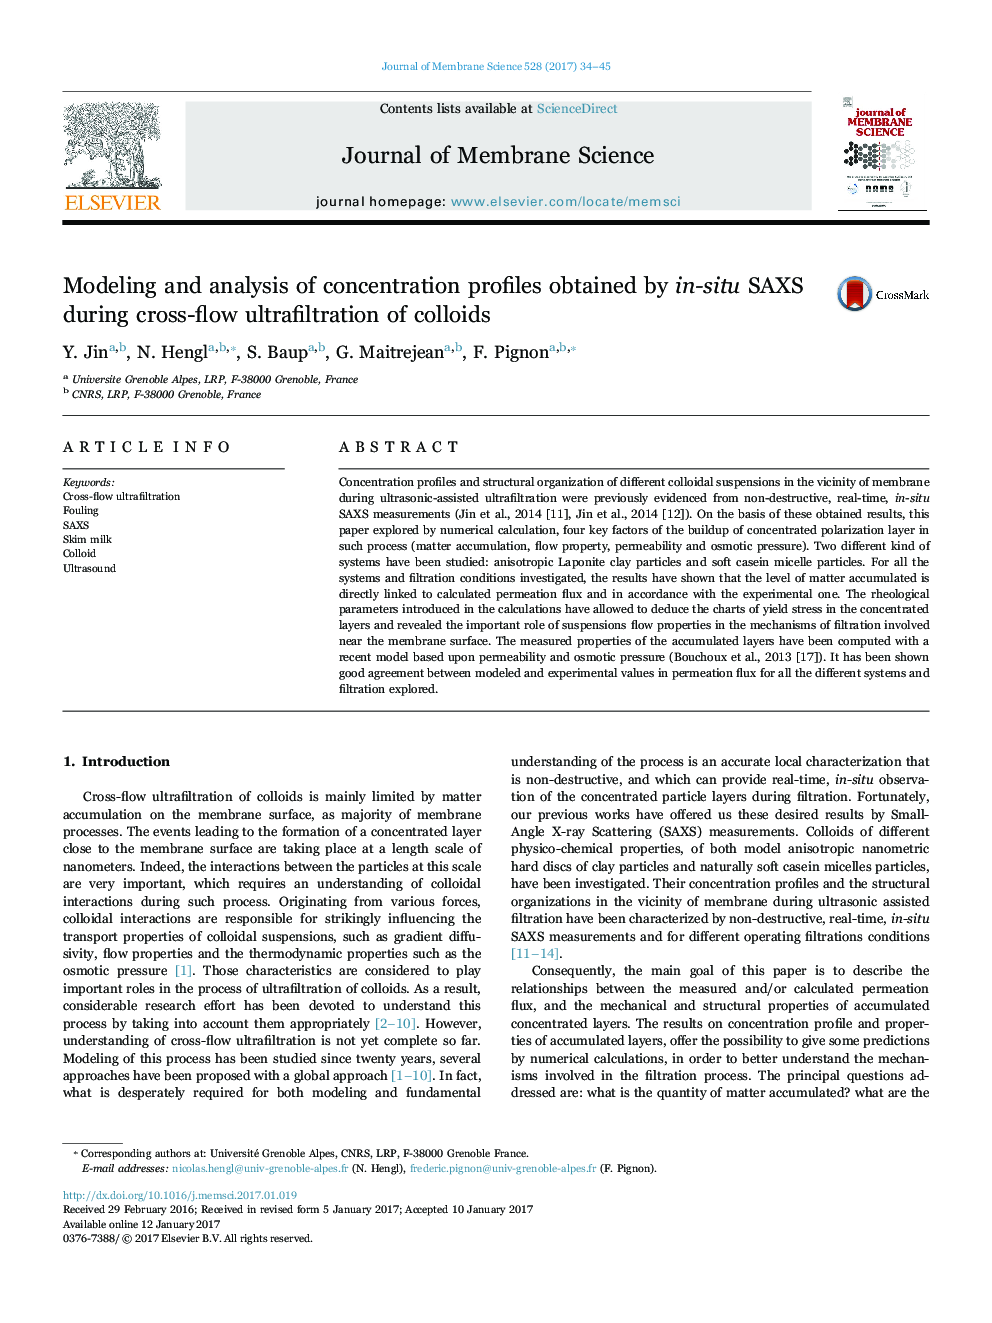 Modeling and analysis of concentration profiles obtained by in-situ SAXS during cross-flow ultrafiltration of colloids